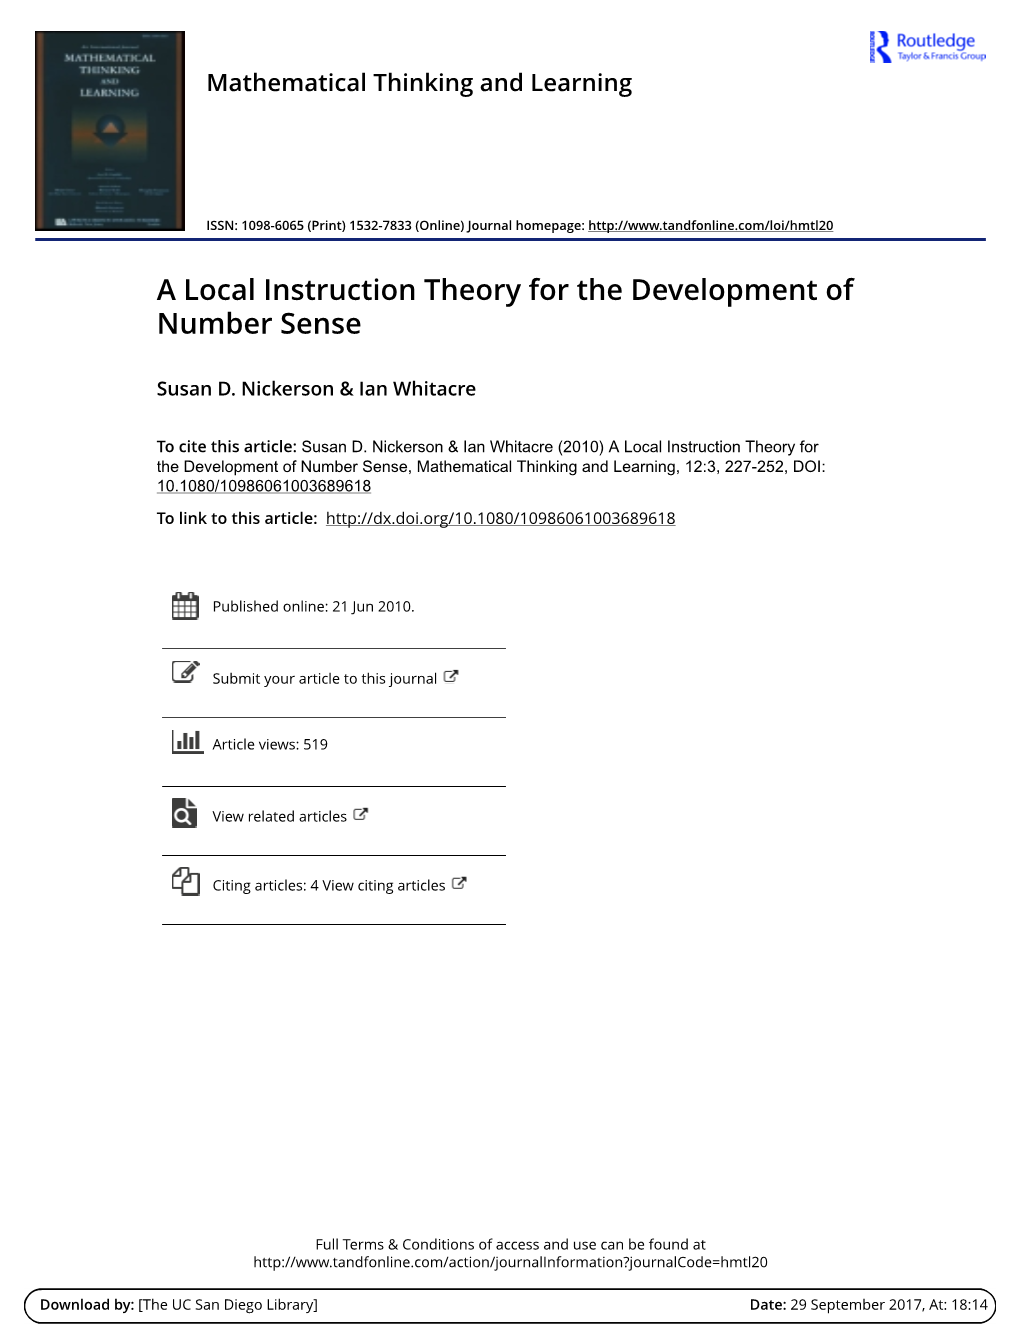 A Local Instruction Theory for the Development of Number Sense